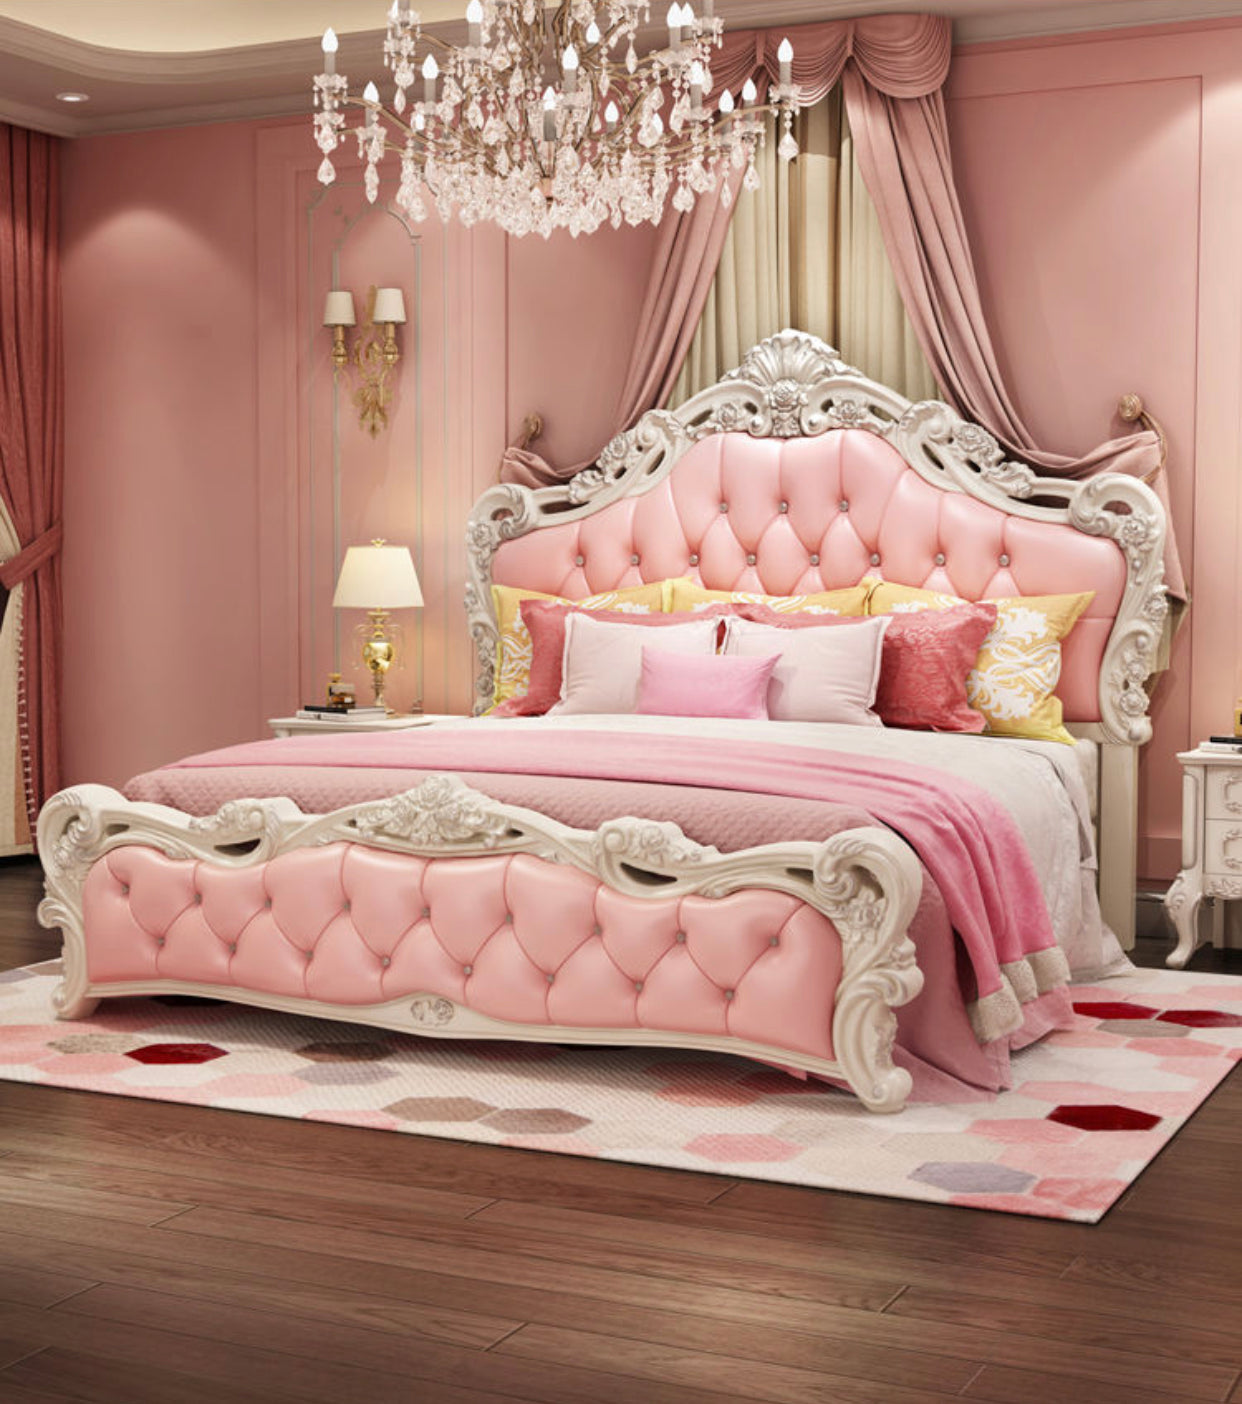 Experience elegance & comfort with the X01 European Luxurious Cream White/Pink Tufted Rococo 7 Pieces Bedroom Set. The perfect blend of style and functionality to revitalize your bedroom spaces. Don't miss this stunning bedroom set. Order now!